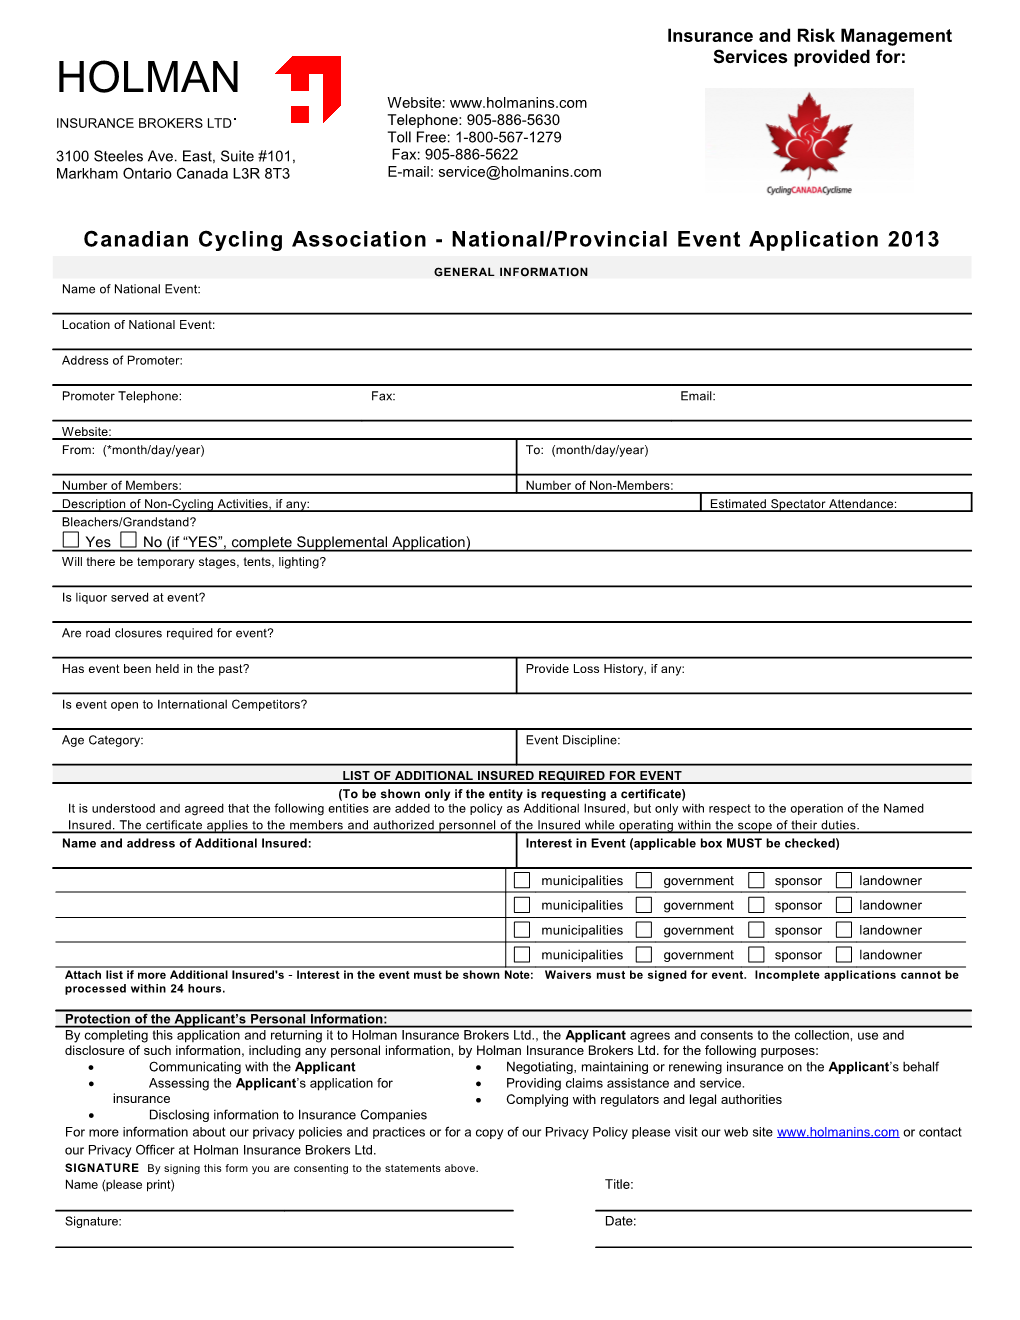 Canadian Cycling Association - National/Provincial Event Application